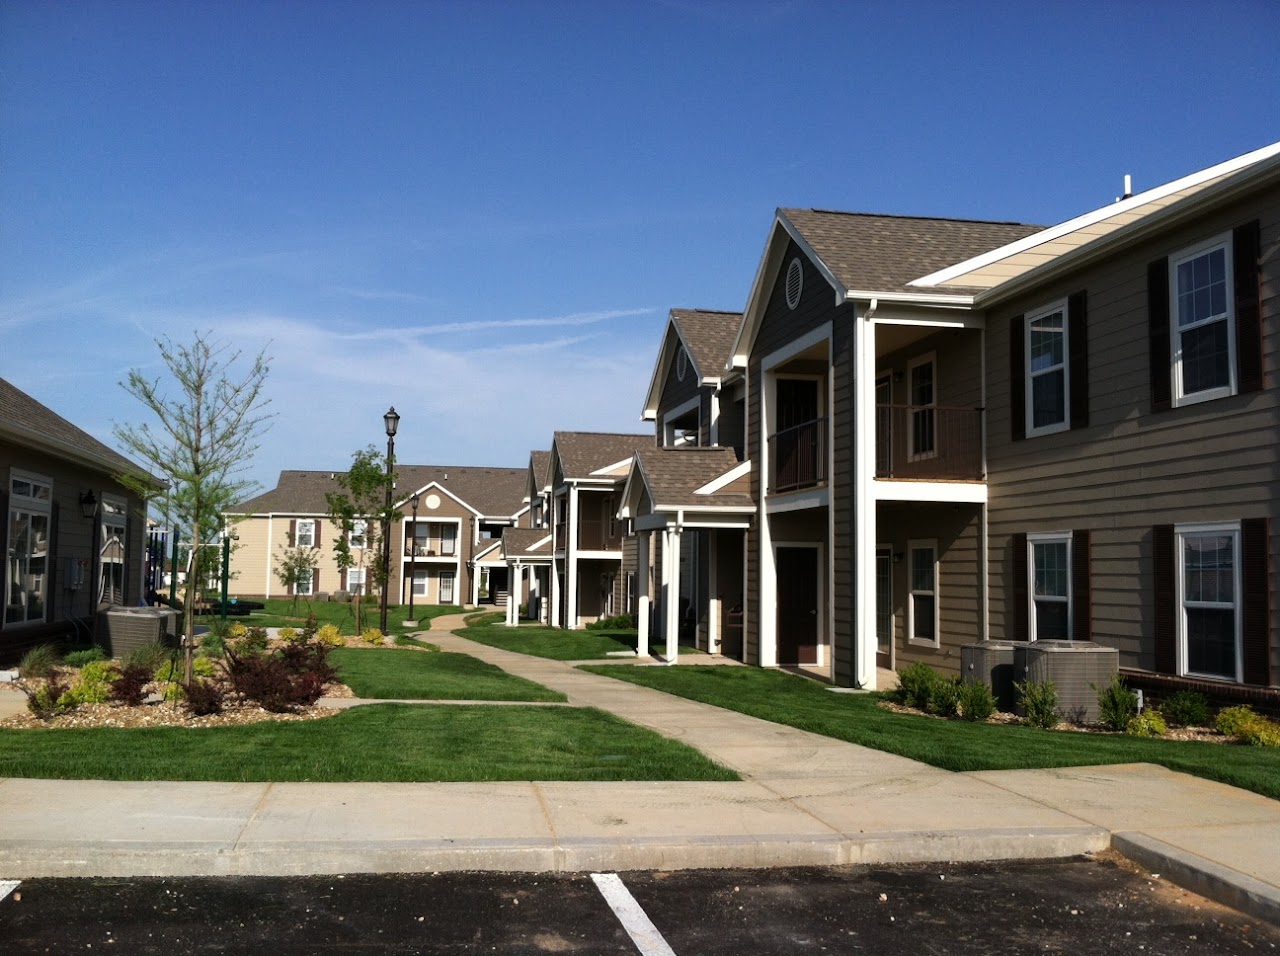 Photo of CHURCHILL APTS. Affordable housing located at 664 CHURCH ST MARSHFIELD, MO 65706